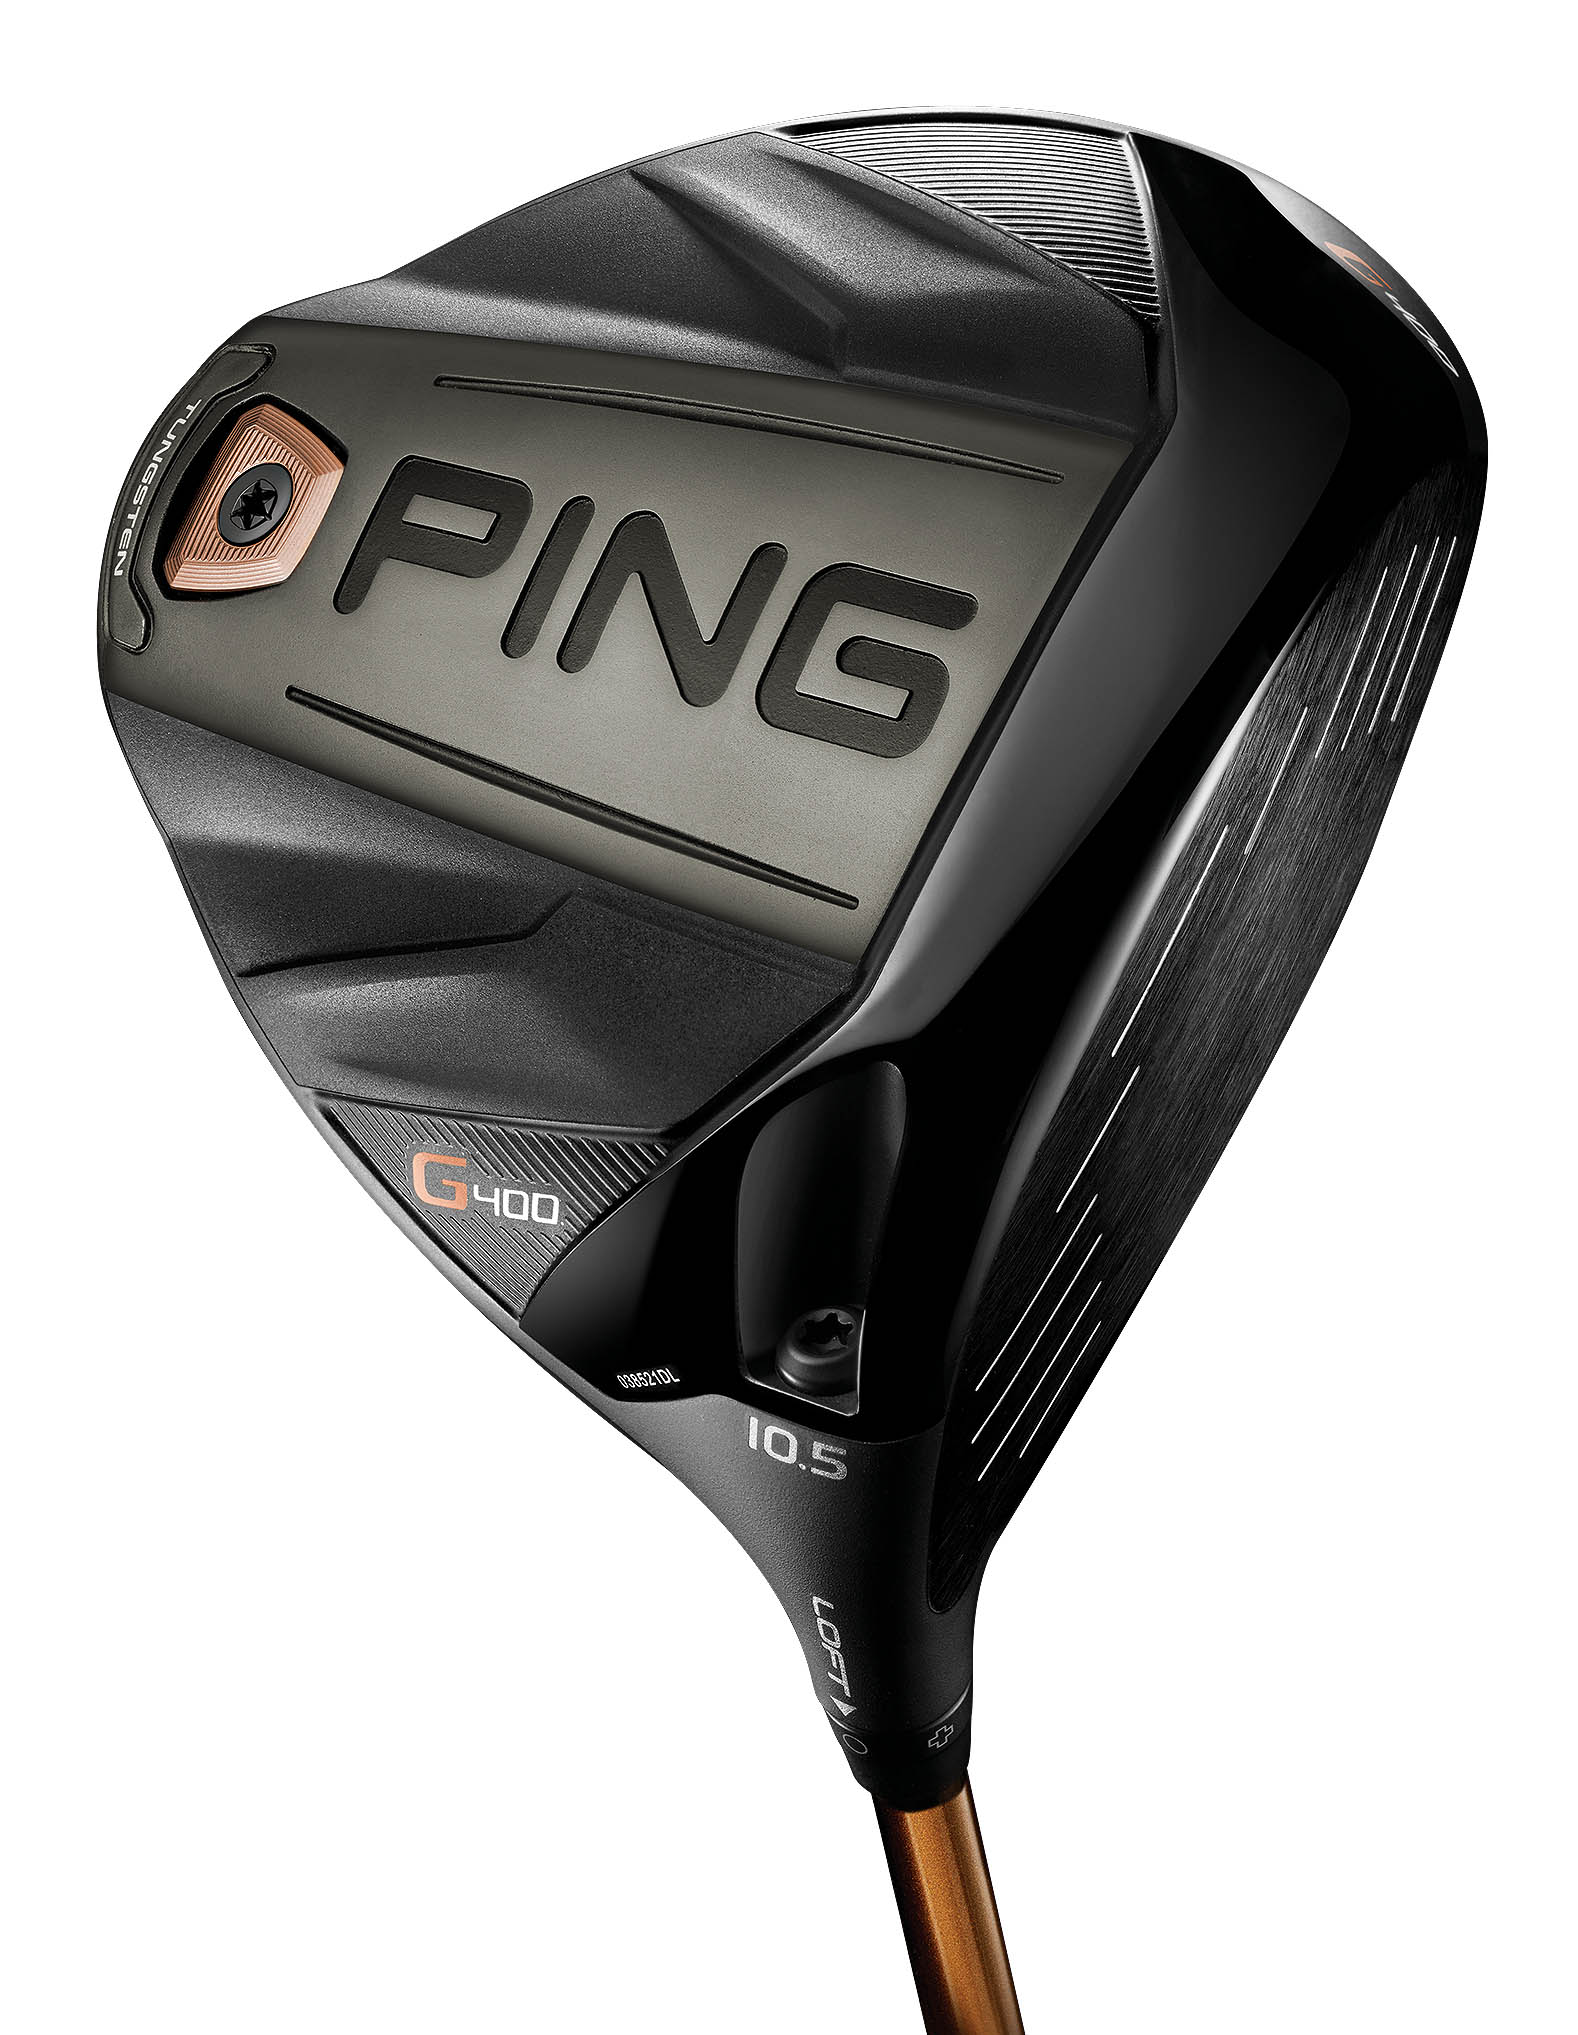 REVIEW Ping G400 driver and woods The GOLFTEC Scramble